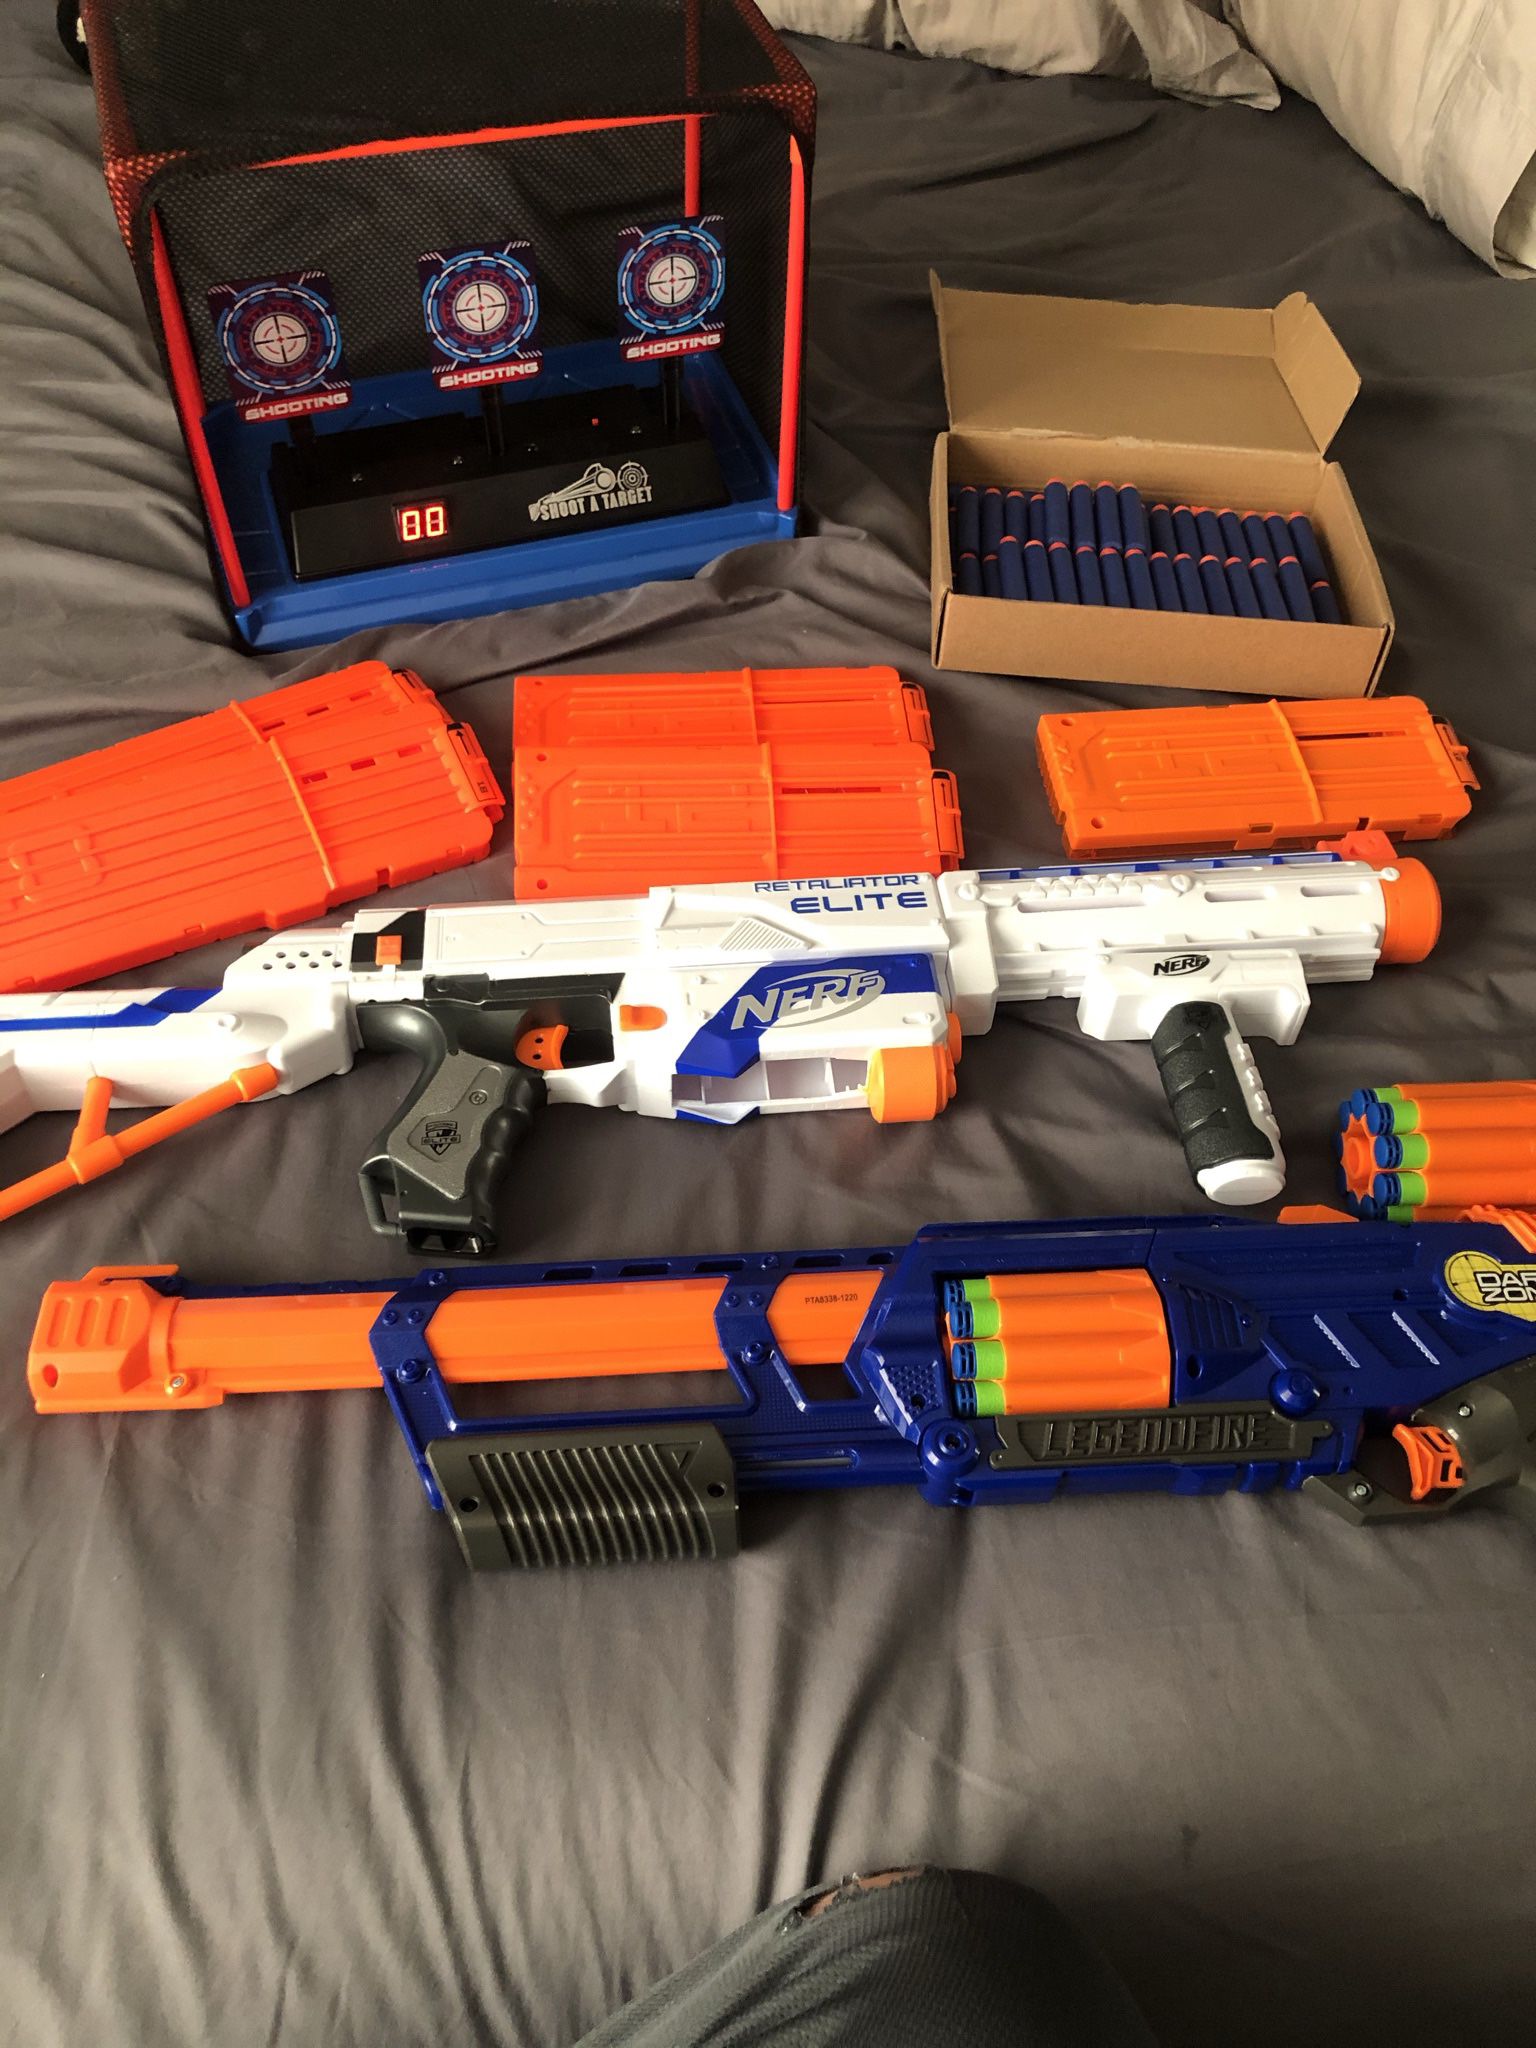 Two Dart Guns With Extended Mags, Extra Darts, And Firing Range